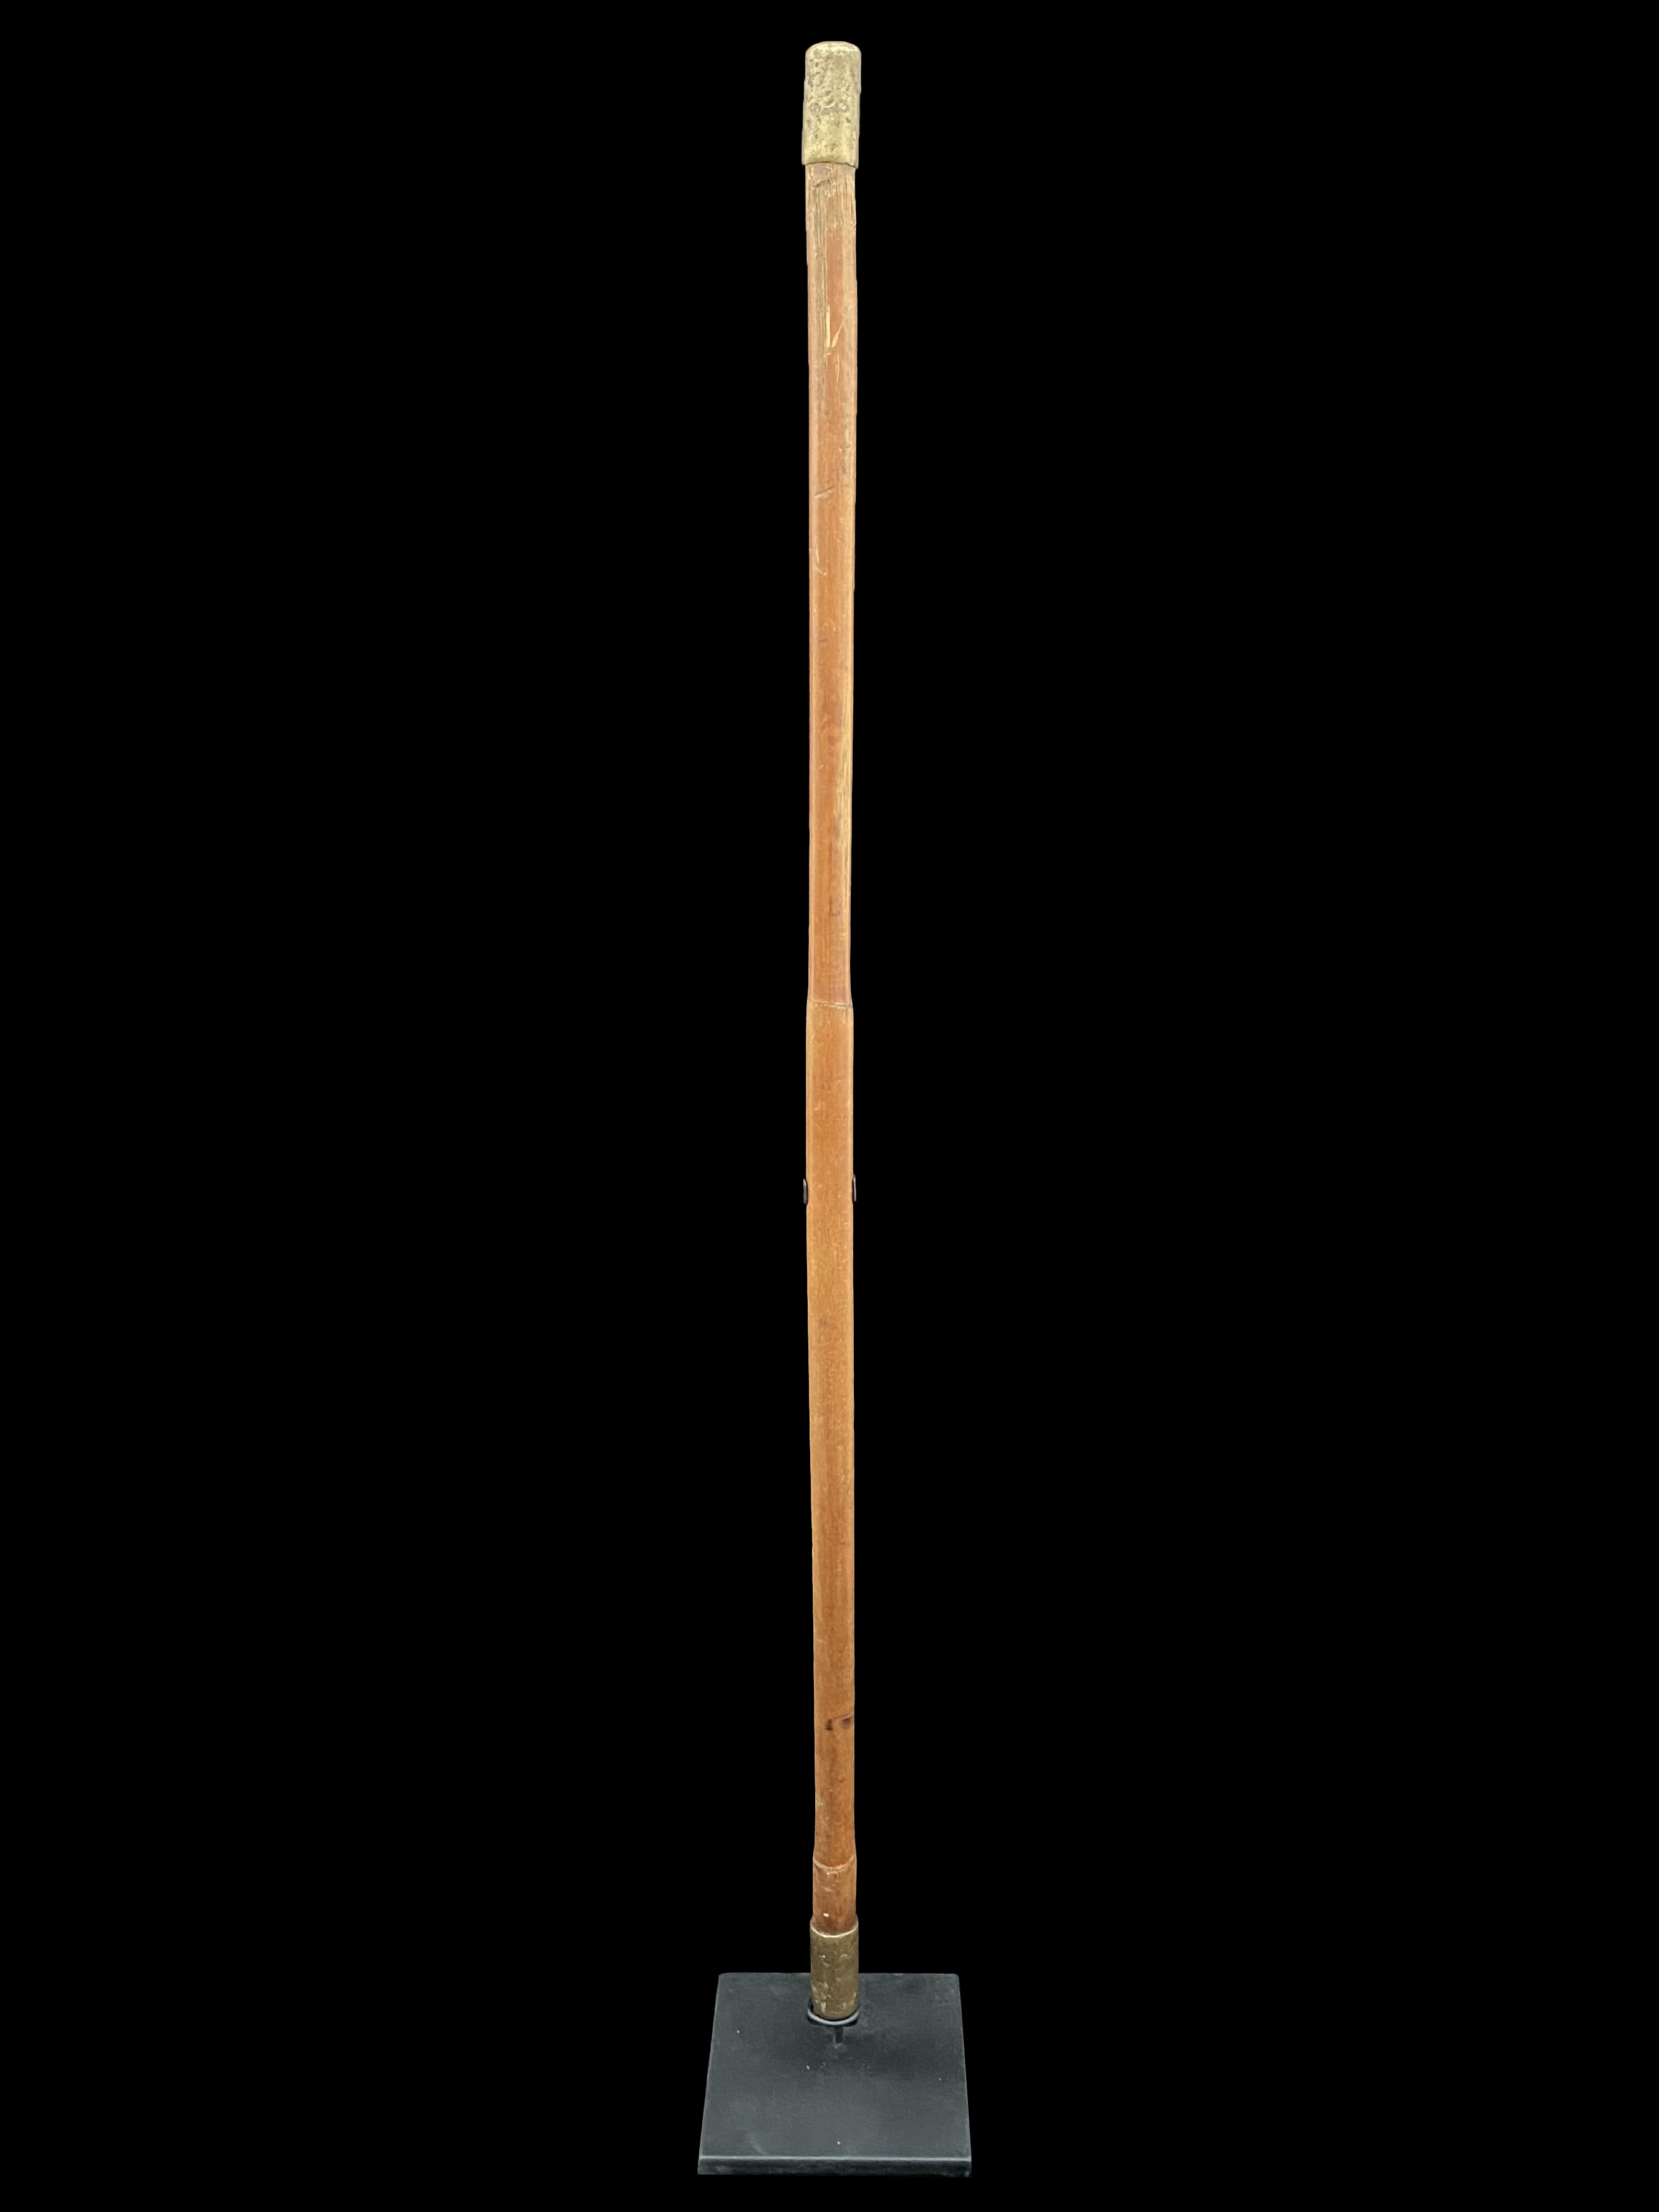 Walking Cane with Bullet Casings - Zulu People, South Africa